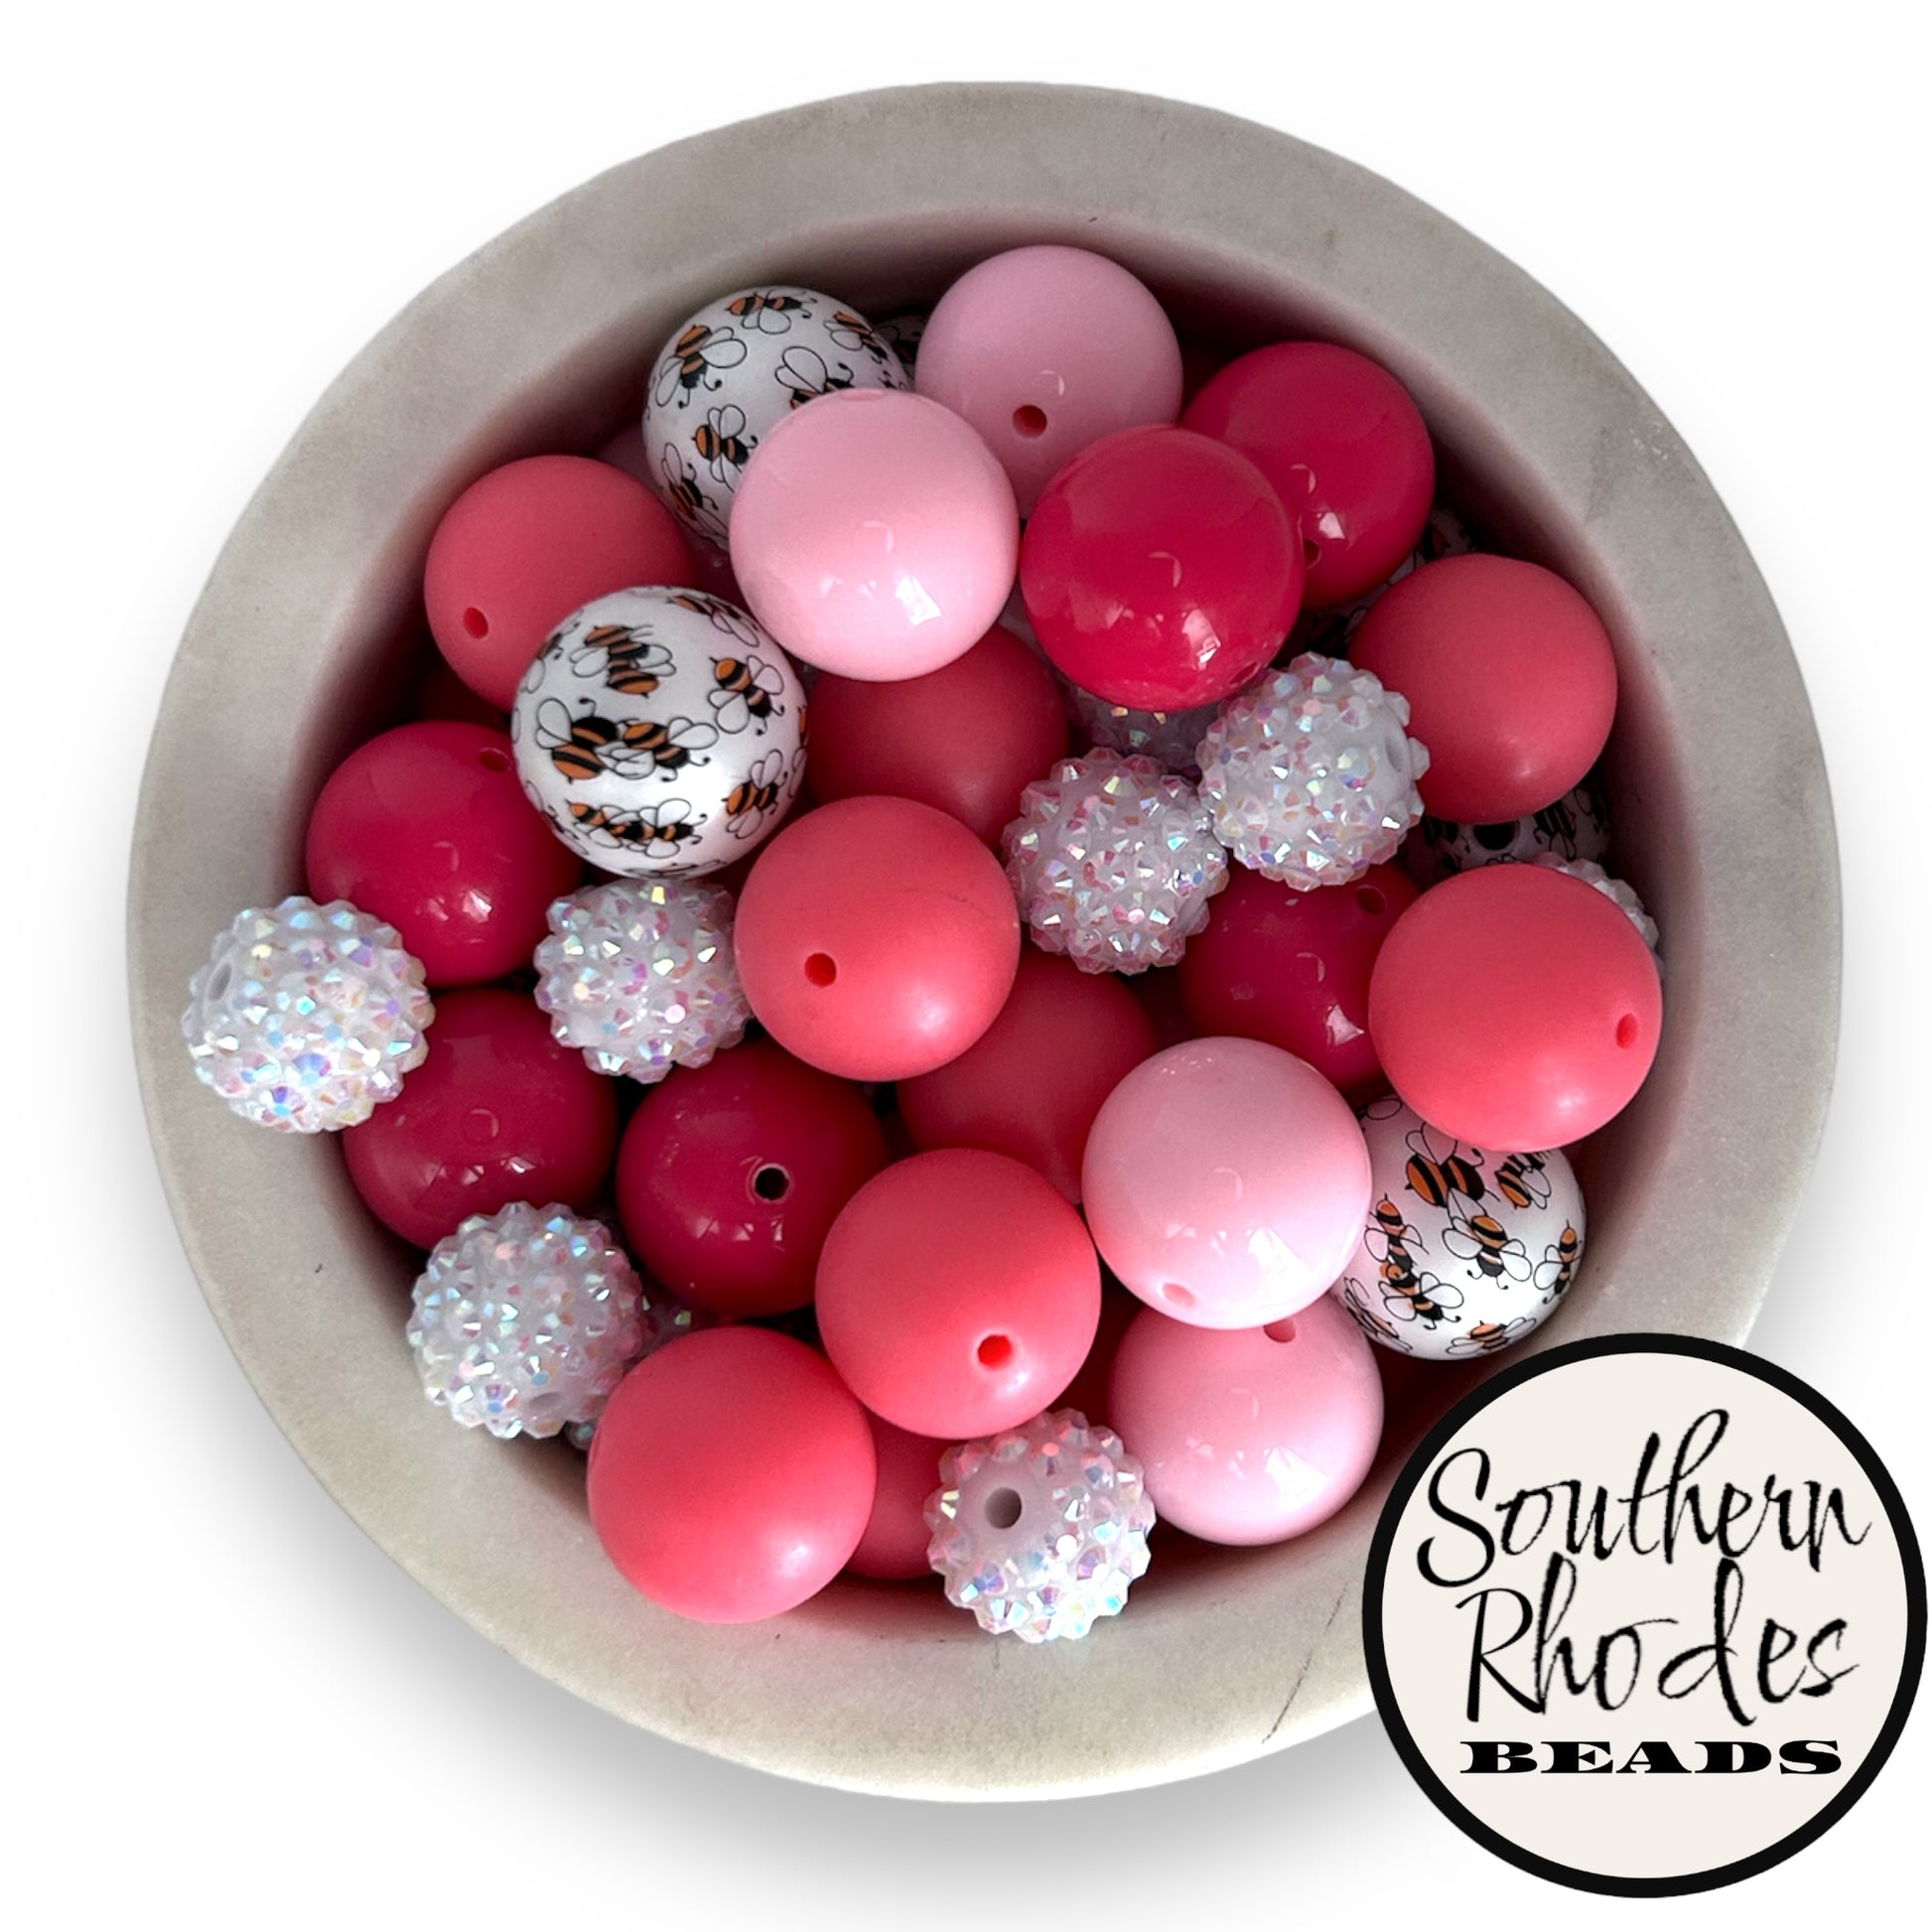 20mm Pink Solid Chunky Acrylic Bubblegum Beads